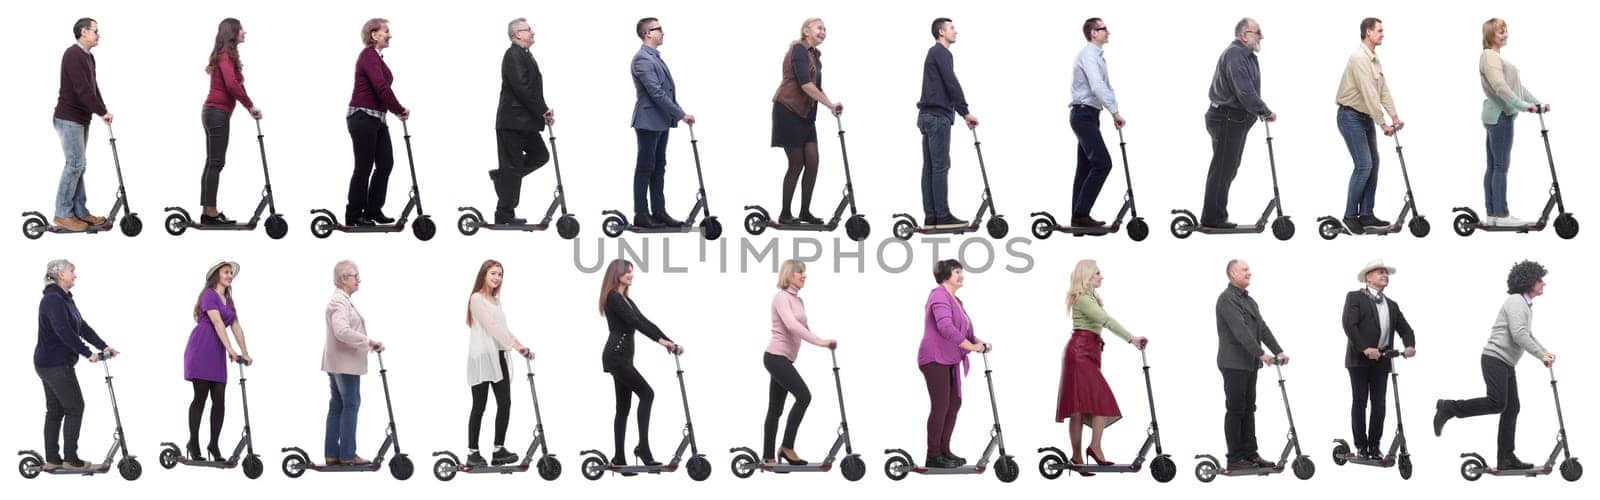 group of successful people on scooter isolated on white background